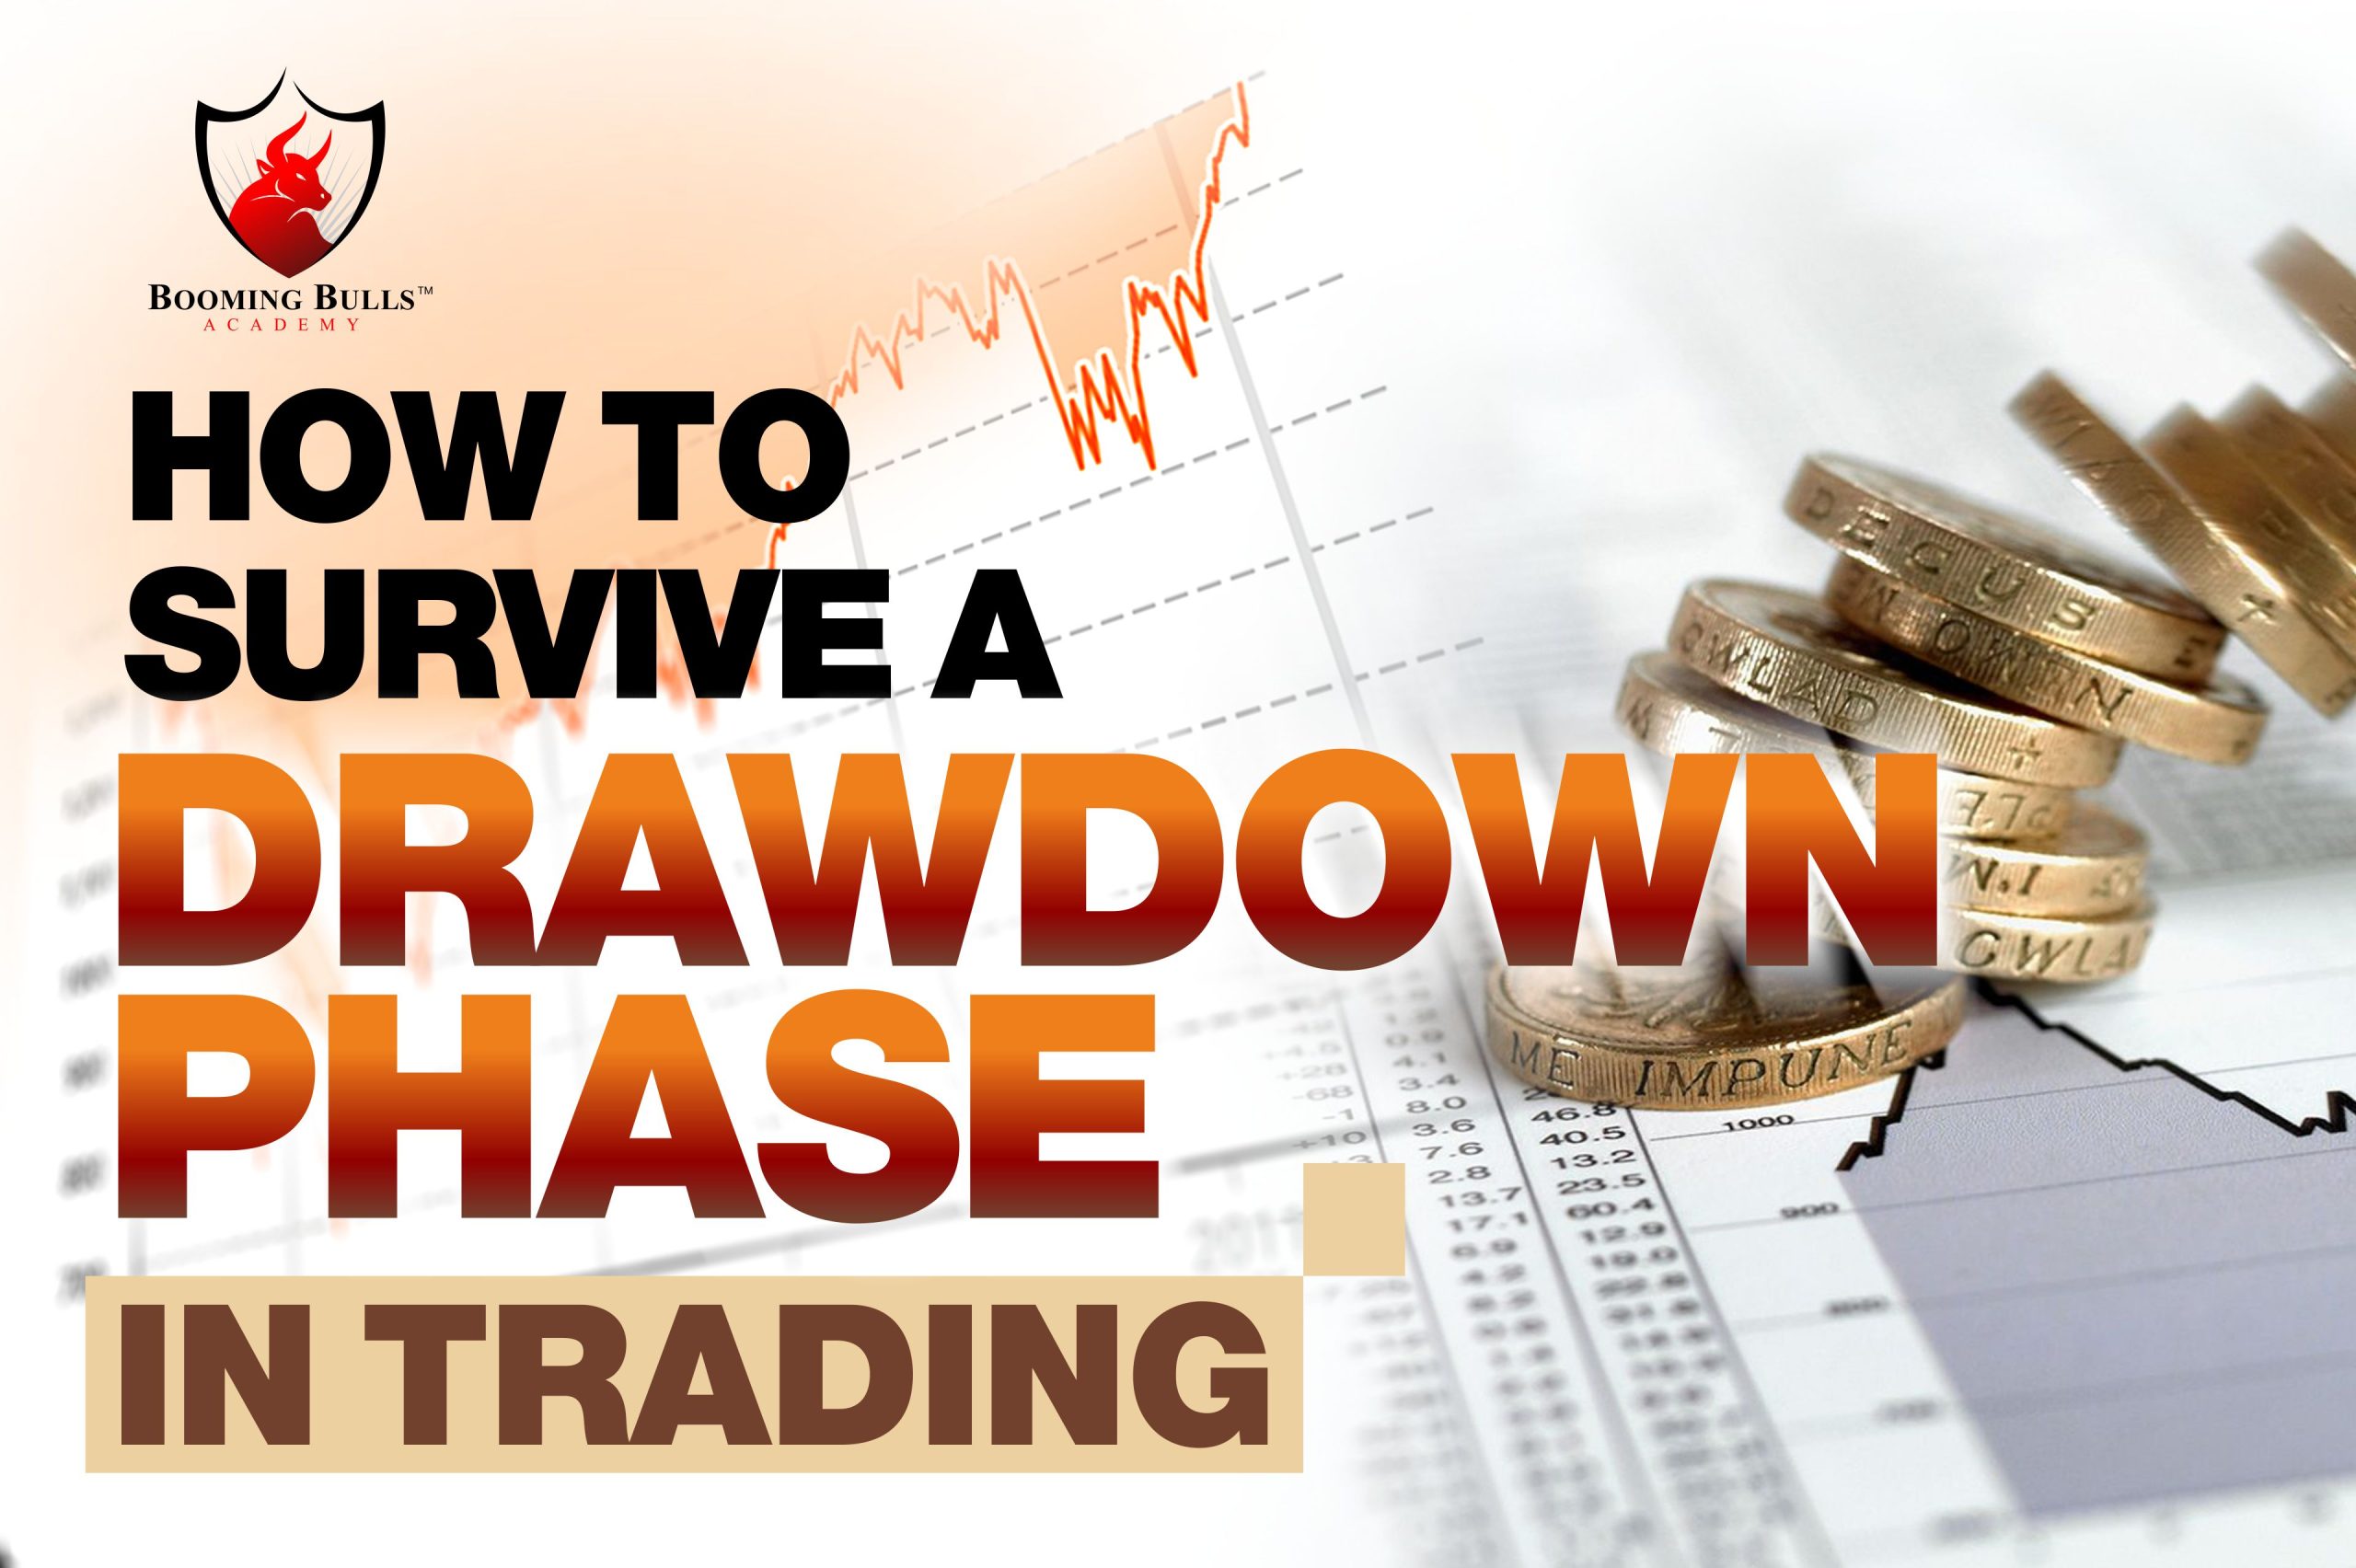 How To Survive A Drawdown Phase In Trading